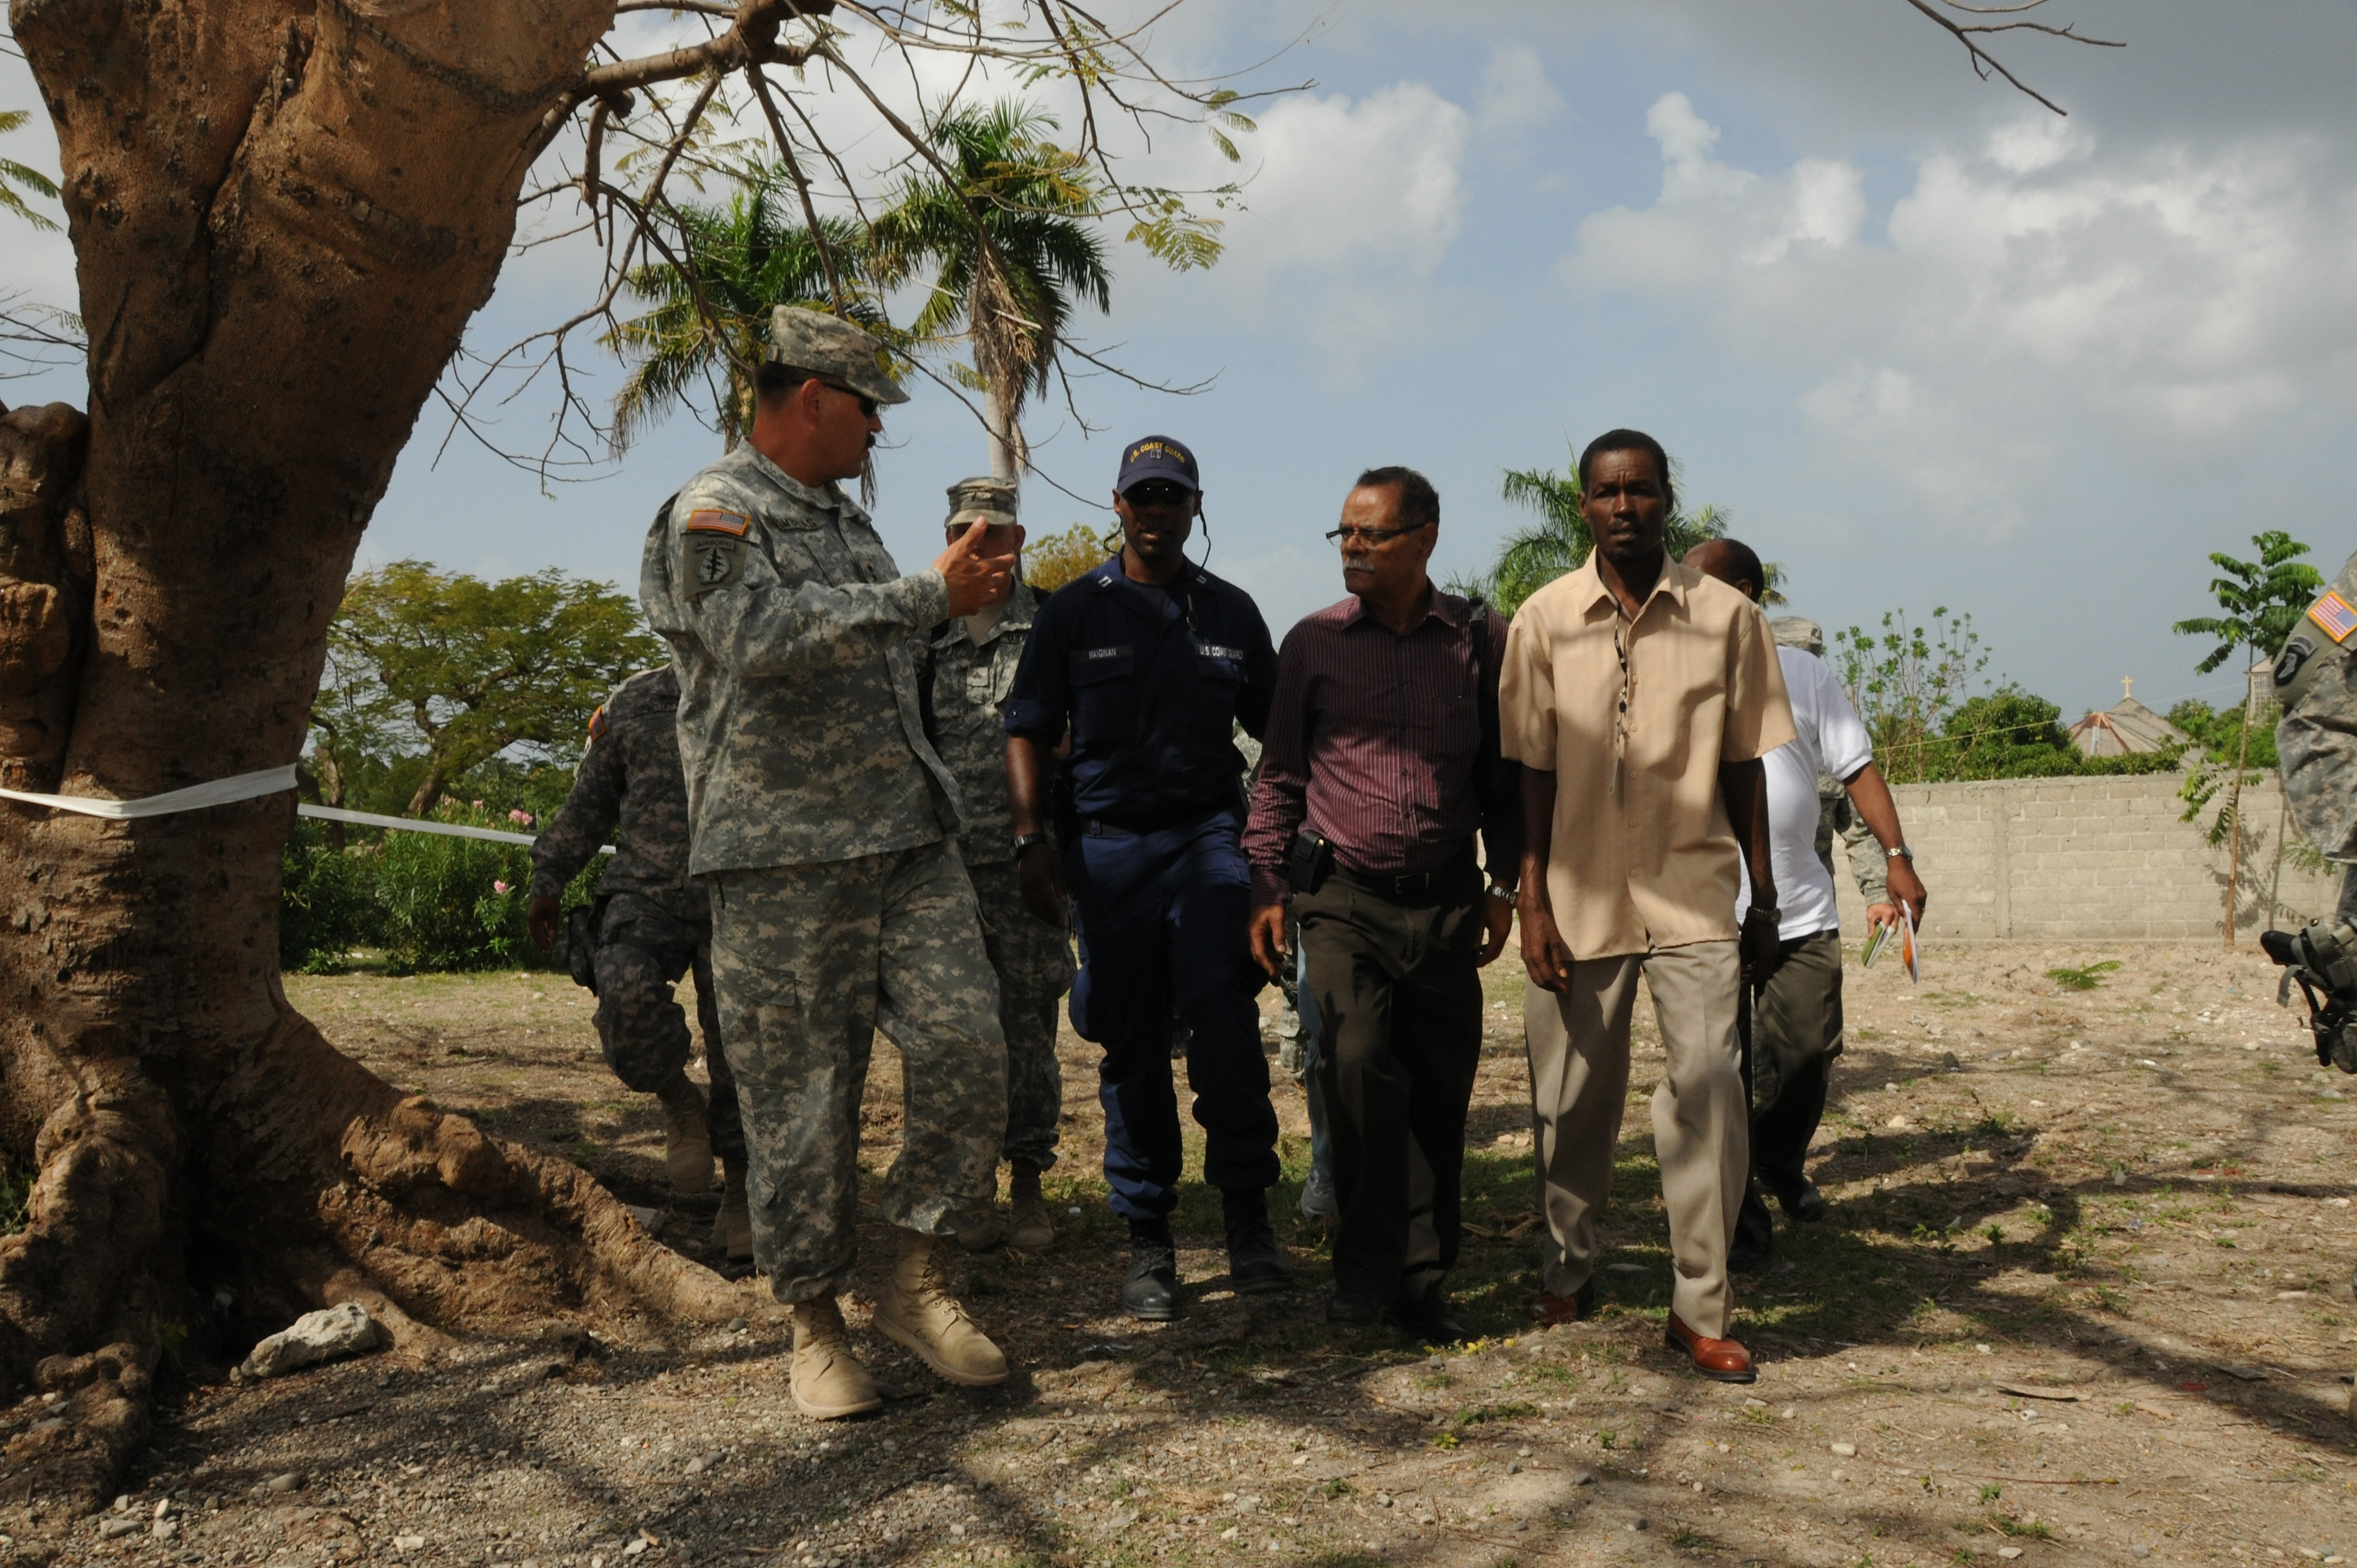 Maj. Gen. Simeon G. Trombitas, commanding general, Joint Task Force-Haiti, left, talks with Dr. Alex Larsen, Haiti's minister of health, second from right, during a visit to a U.S. Army Medical Readiness Training Exercise in Coteaux, Haiti, April 29, 2010. The exercise is allowing U.S. iand Haitian medical care providers to offer free level-one medical care to Haitians in the community in support of Operation Unified Response. Taken on 29 April 2010 by Kaye Richey. Digitally posted at https://www.dvidshub.net/image/632133